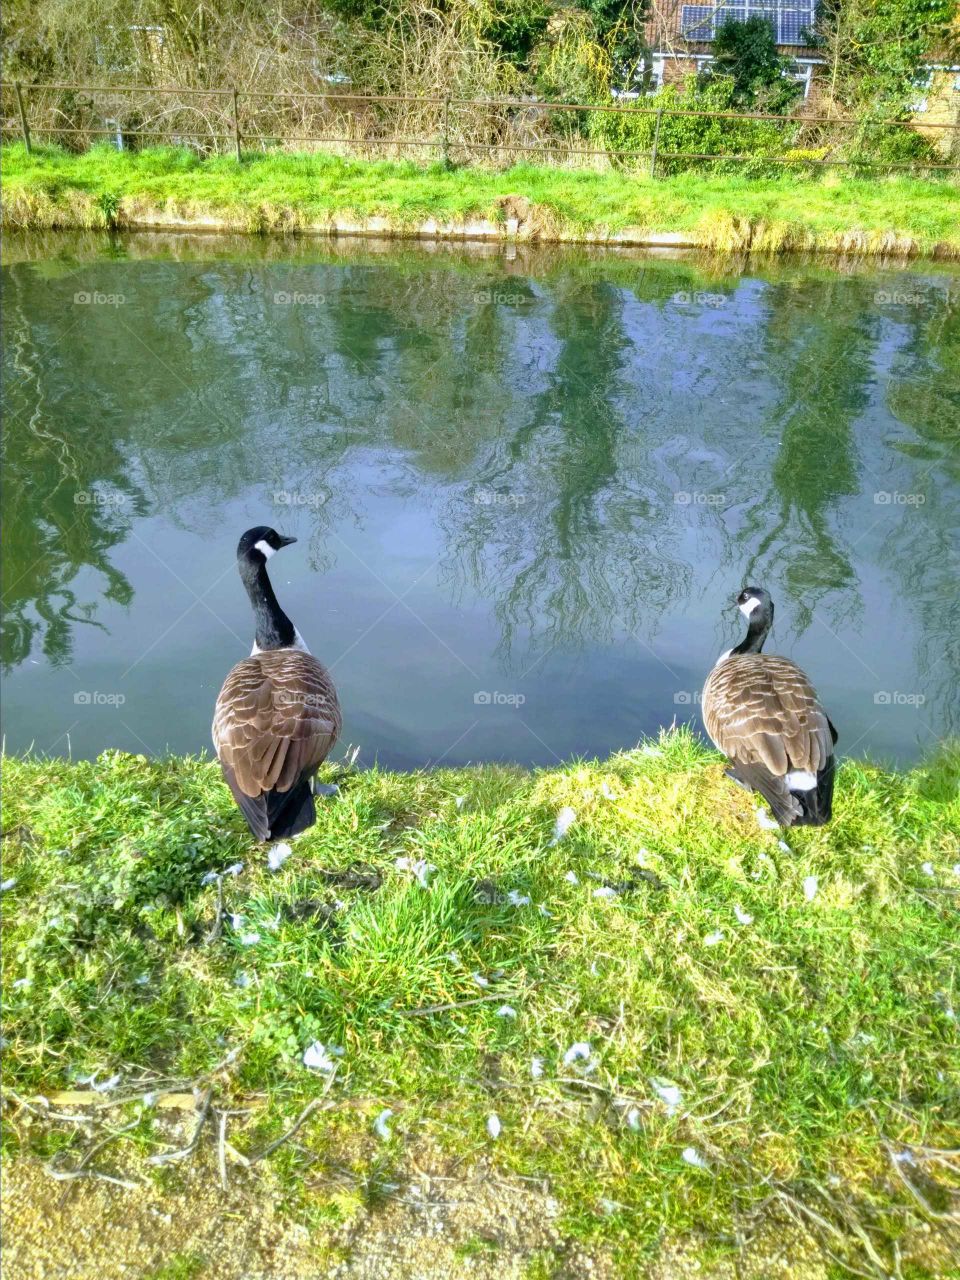 Canadian Geese at Riverside, The New River, Broxbourne, Hertfordshire